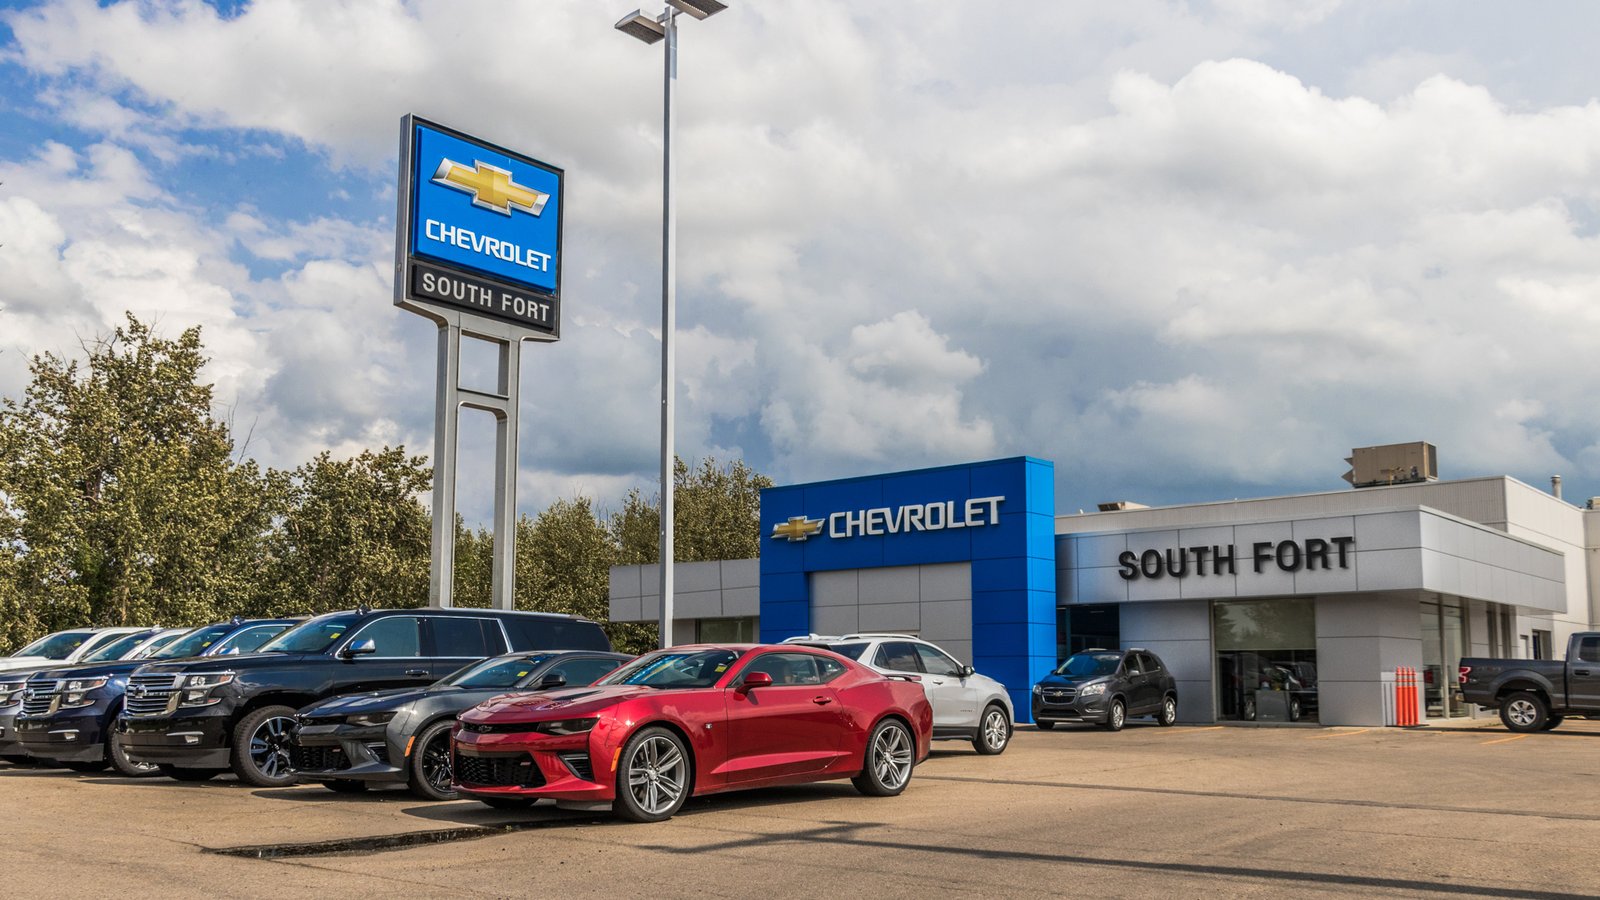 Welcome to South Fort Chevrolet!